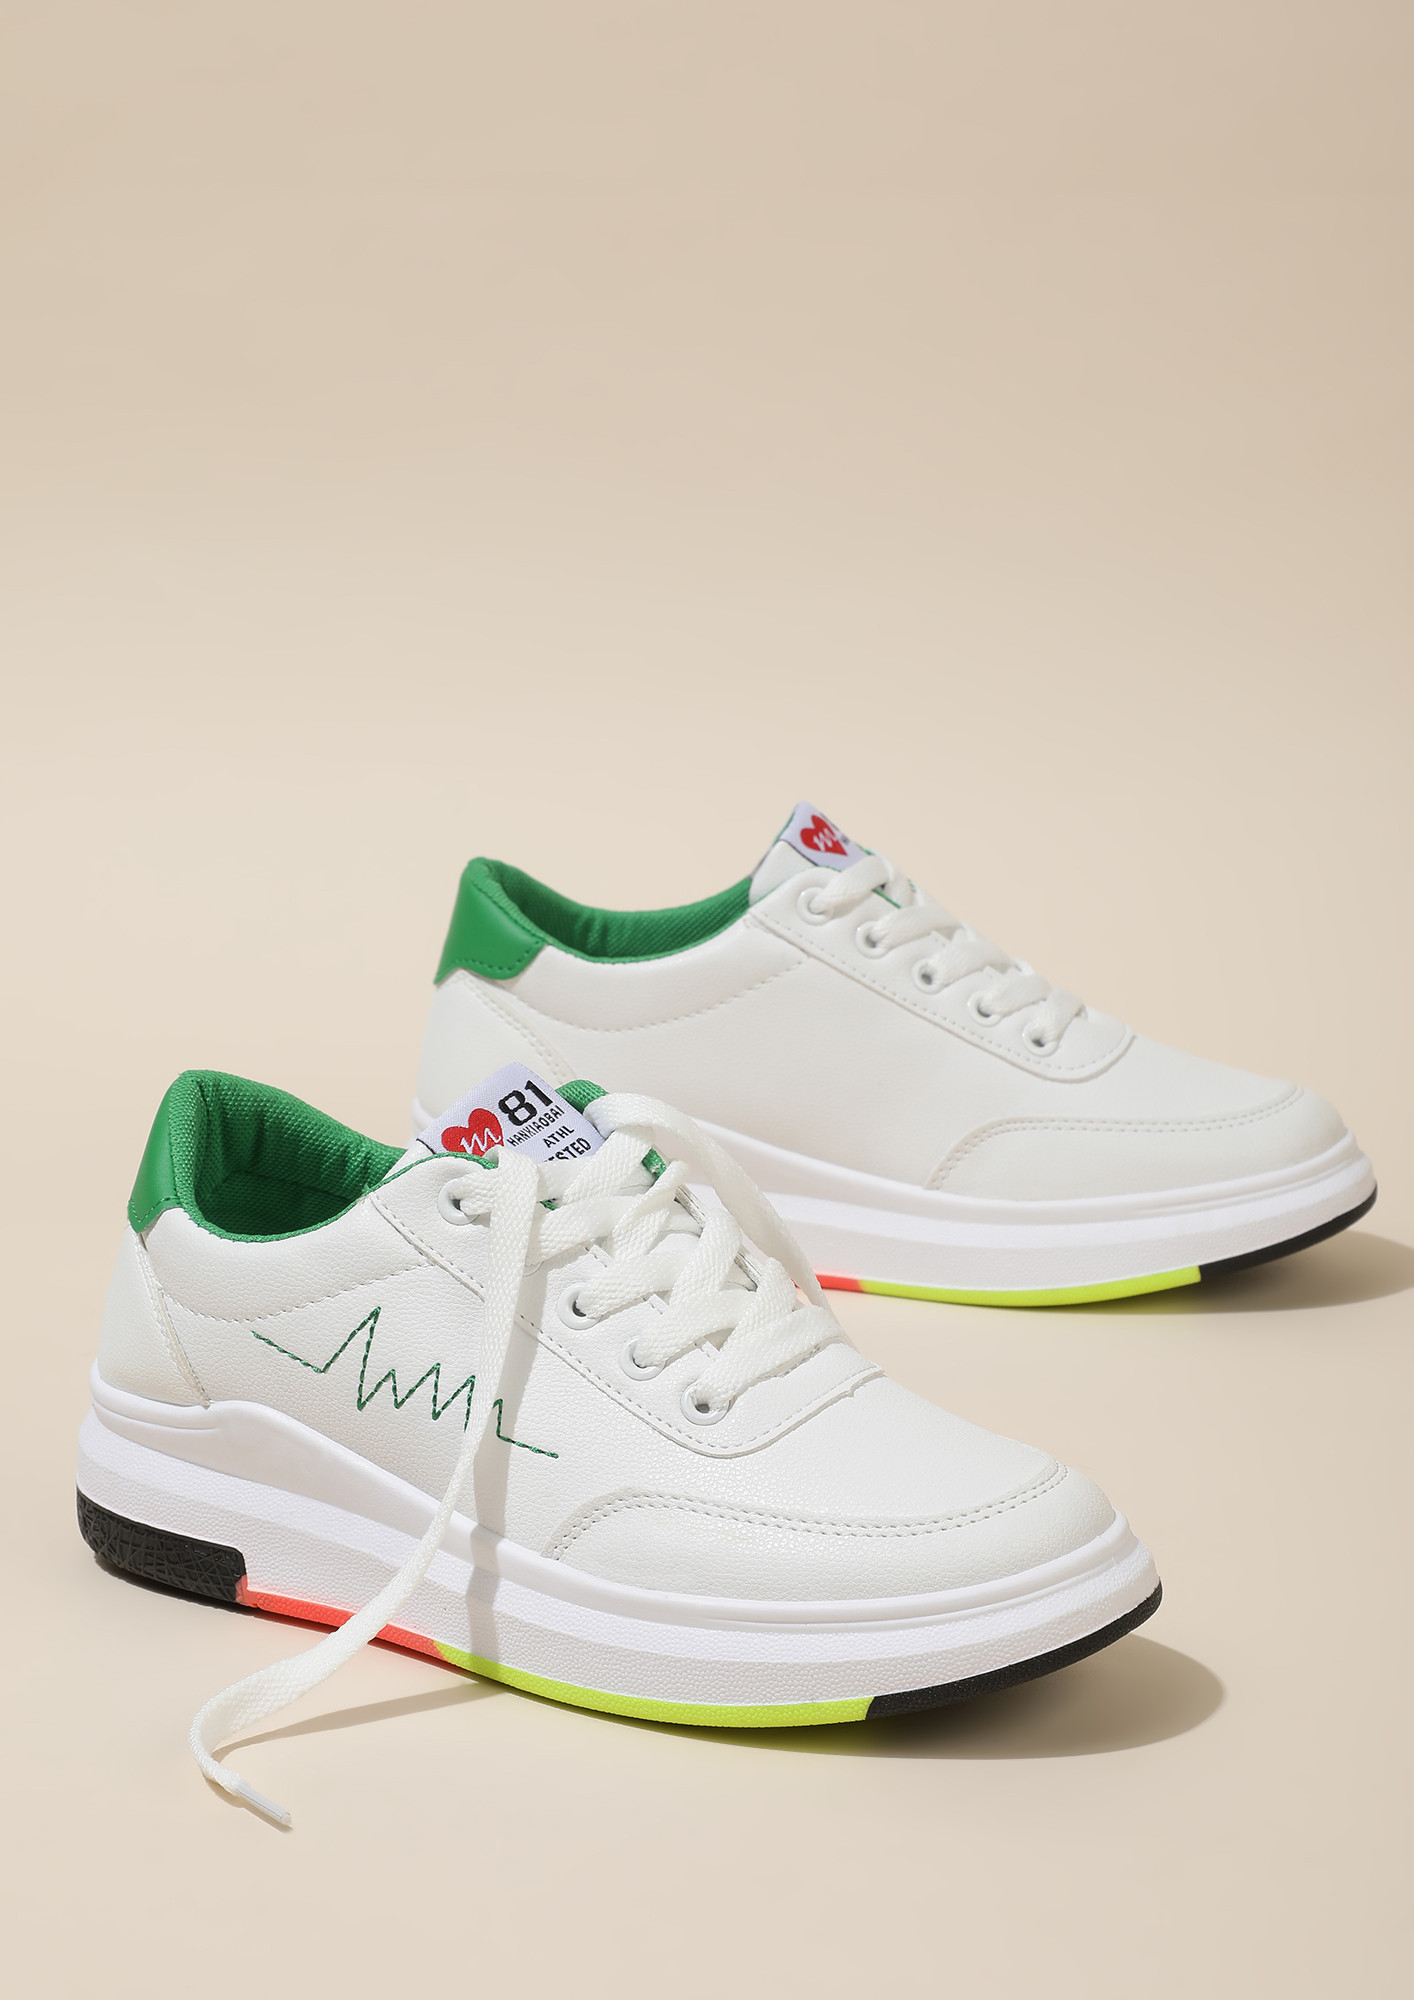 SNEAKERHEAD MUST HAVE WHITE GREEN TRAINERS